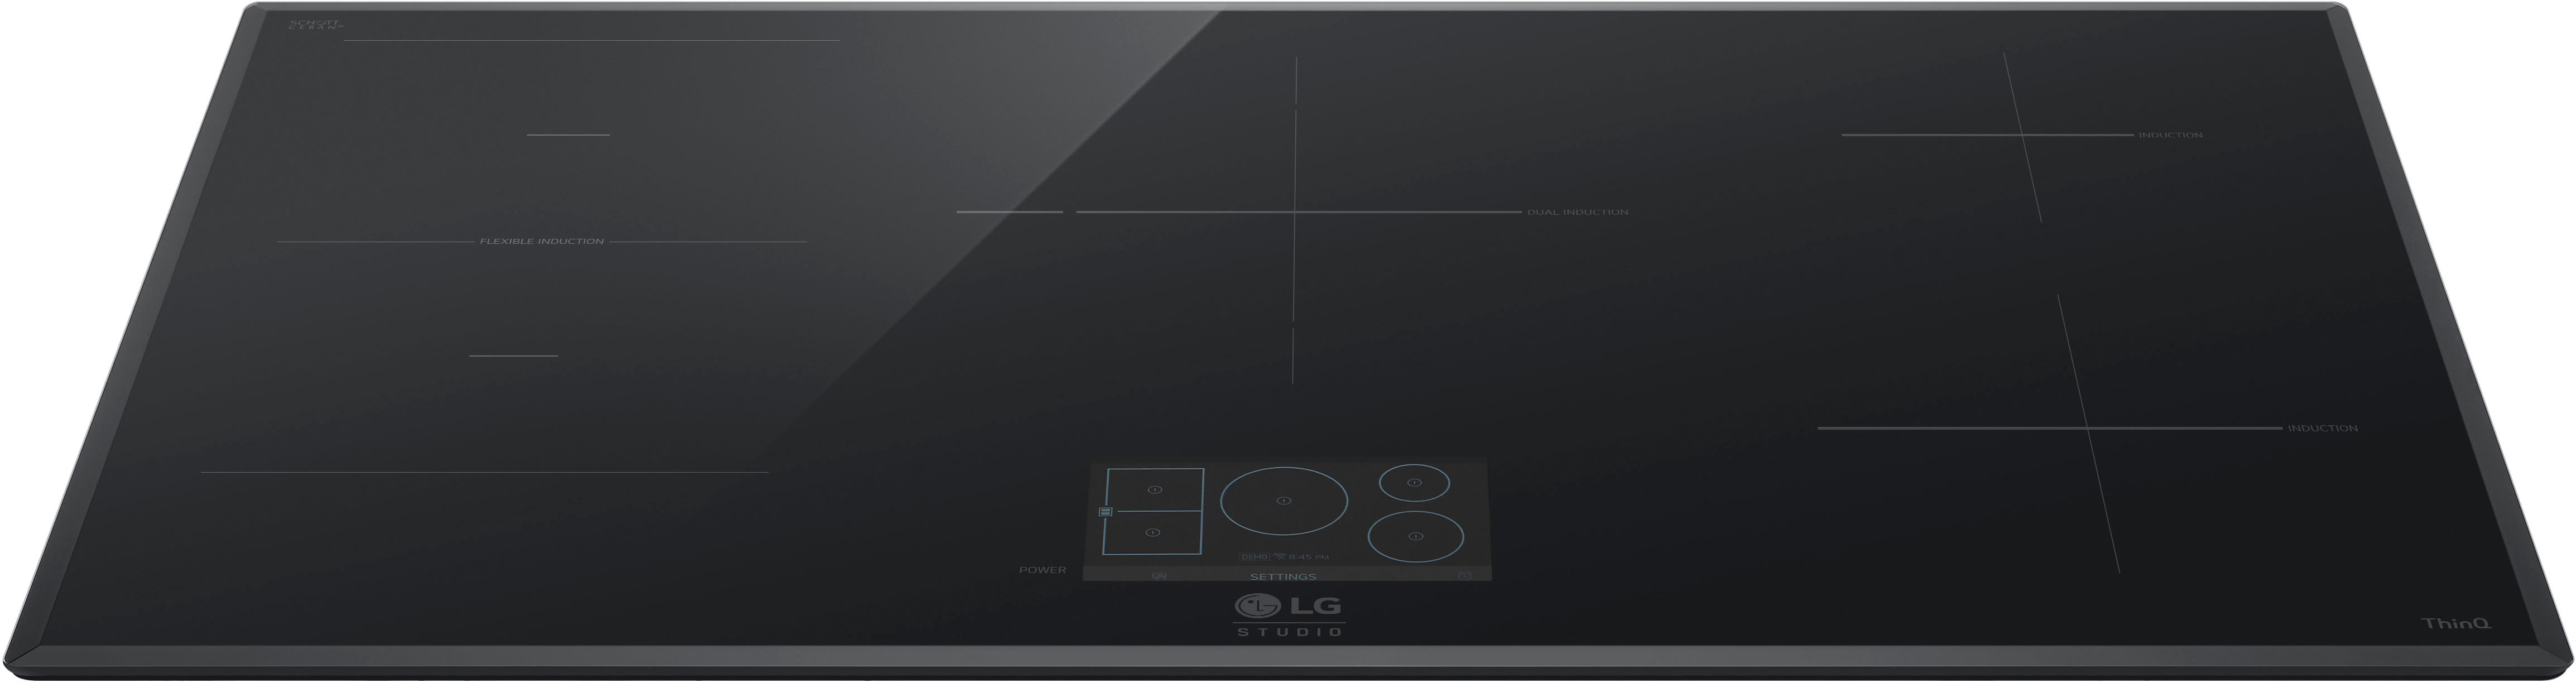 Angle View: LG - STUDIO 36" Built-in Electric Induction Cooktop with 5 burners and Flex Cooking Zone - Black